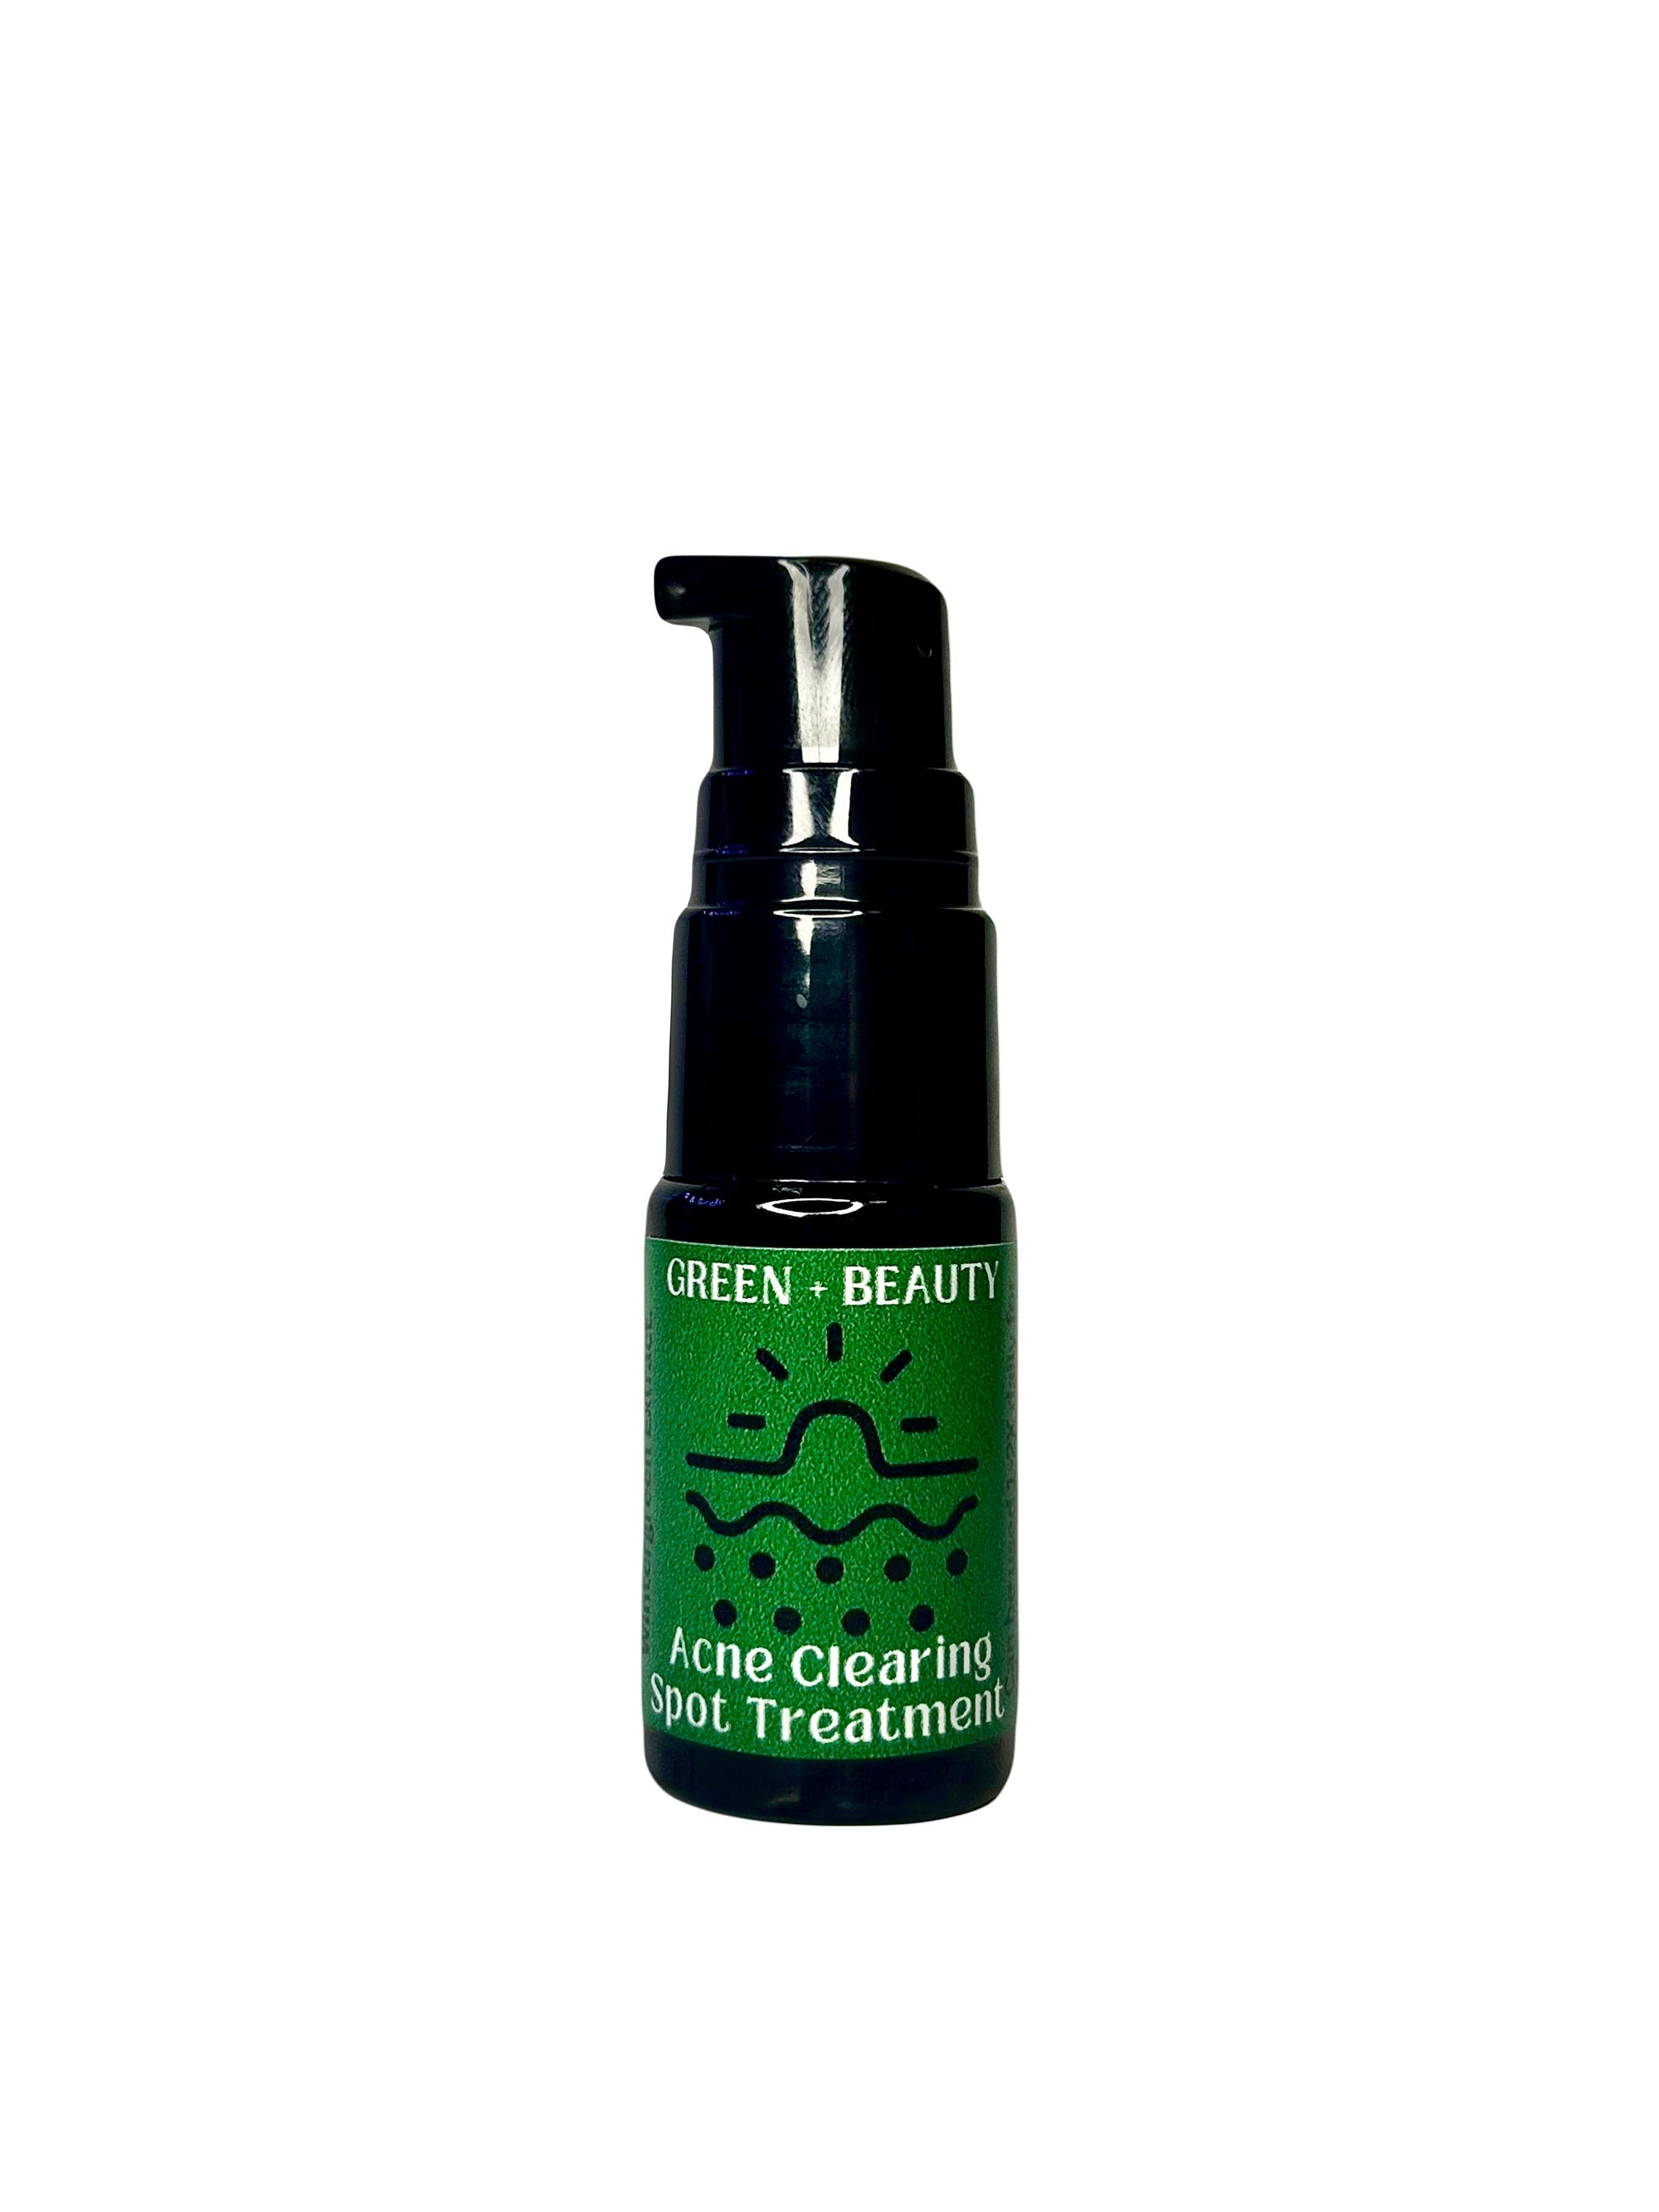 Acne Clearing Spot Treatment - Green + Beauty Skincare